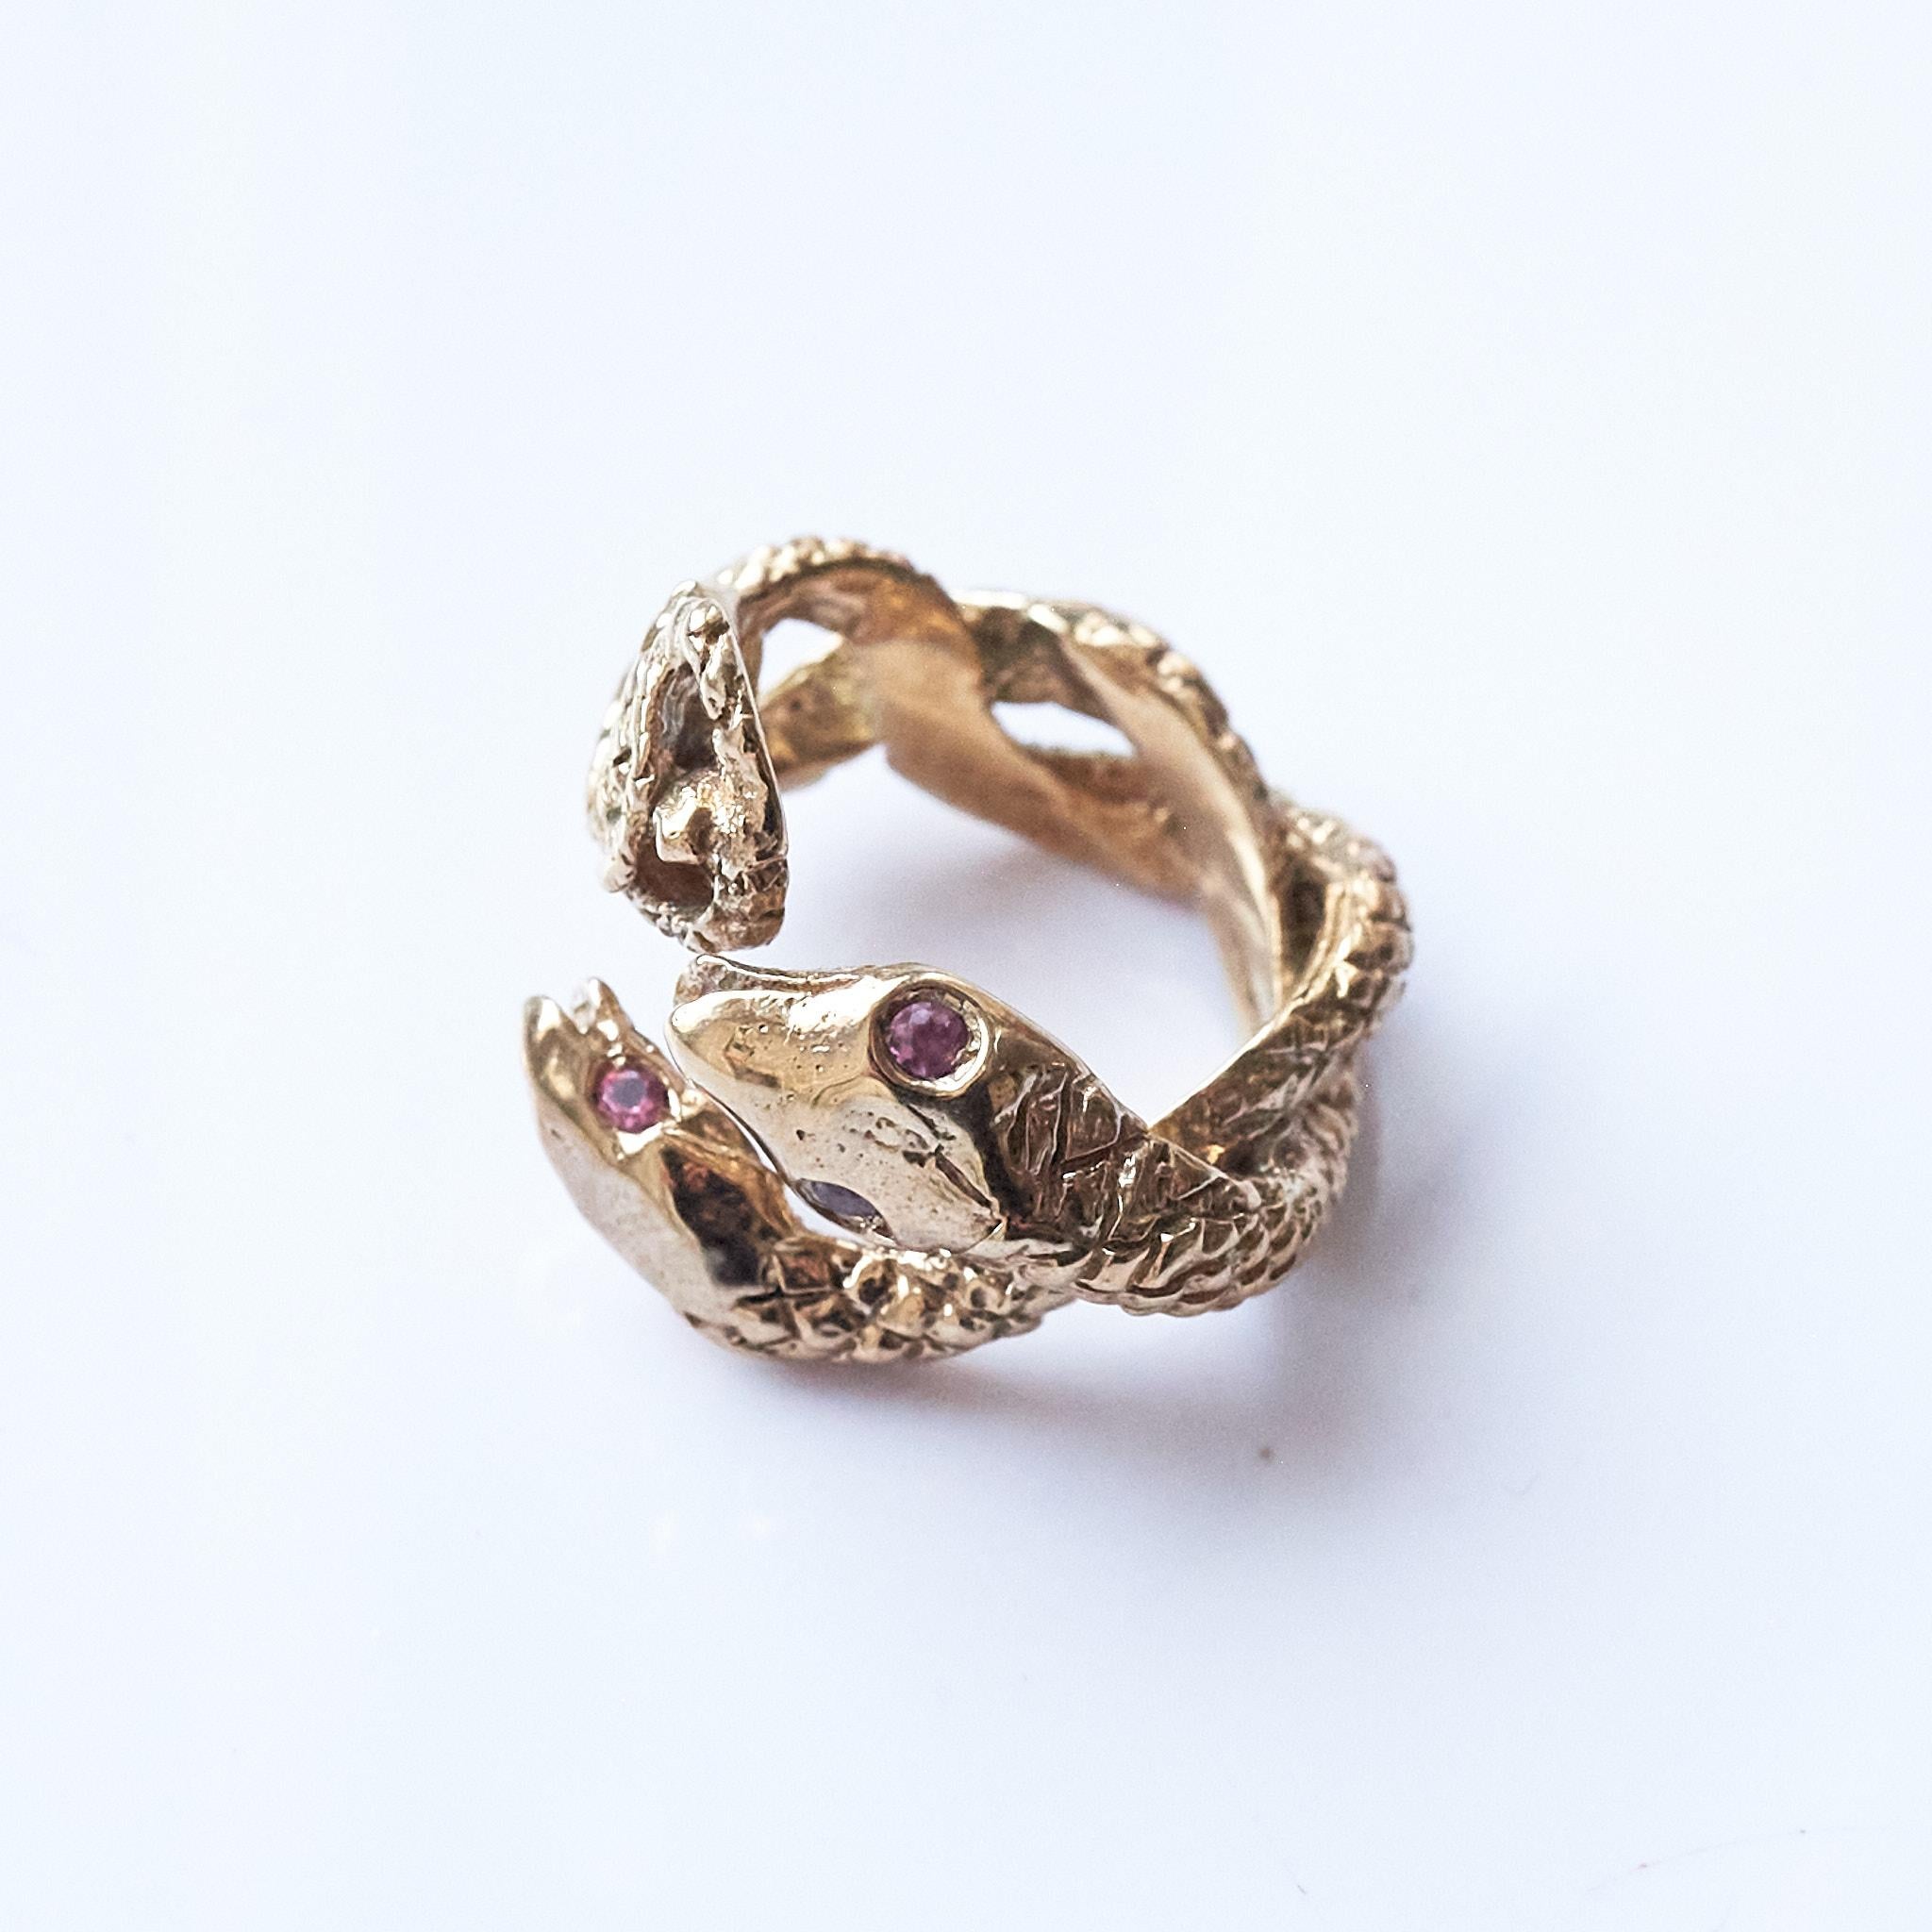 Animal jewelry Pink Sapphire Snake Ring Bronze Cocktail Ring J Dauphin For Sale 5